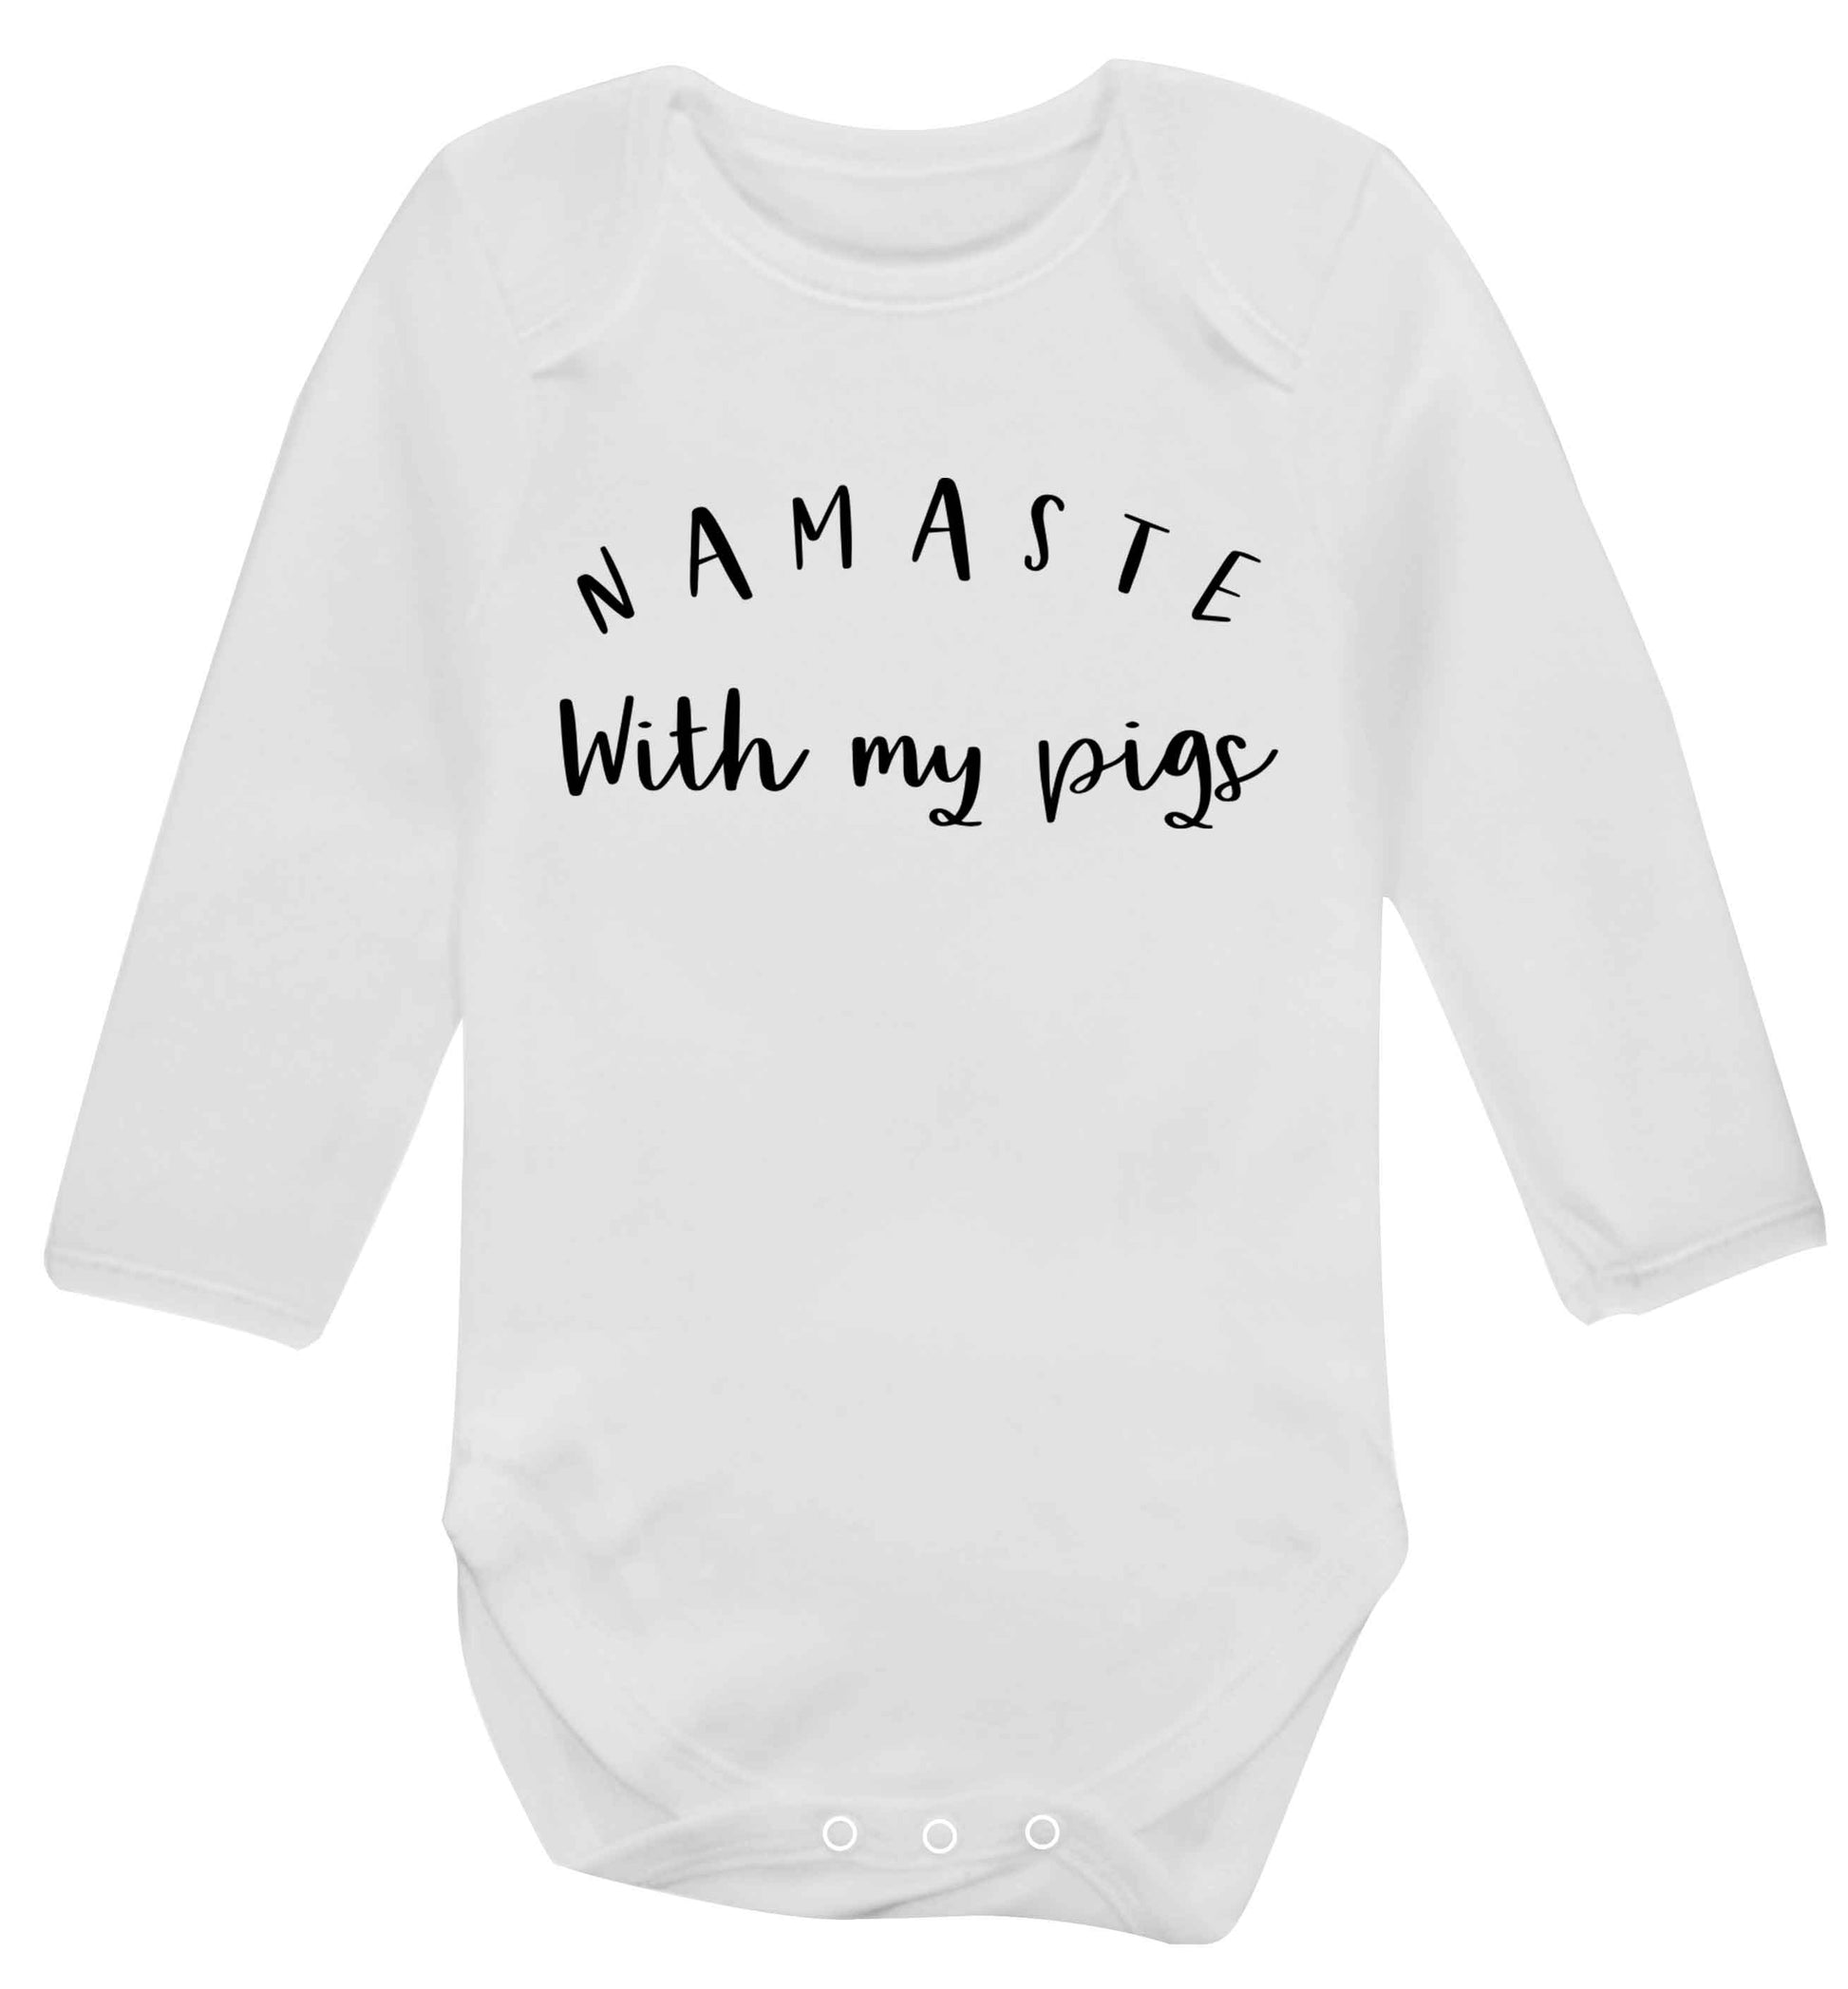 Namaste with my pigs Baby Vest long sleeved white 6-12 months